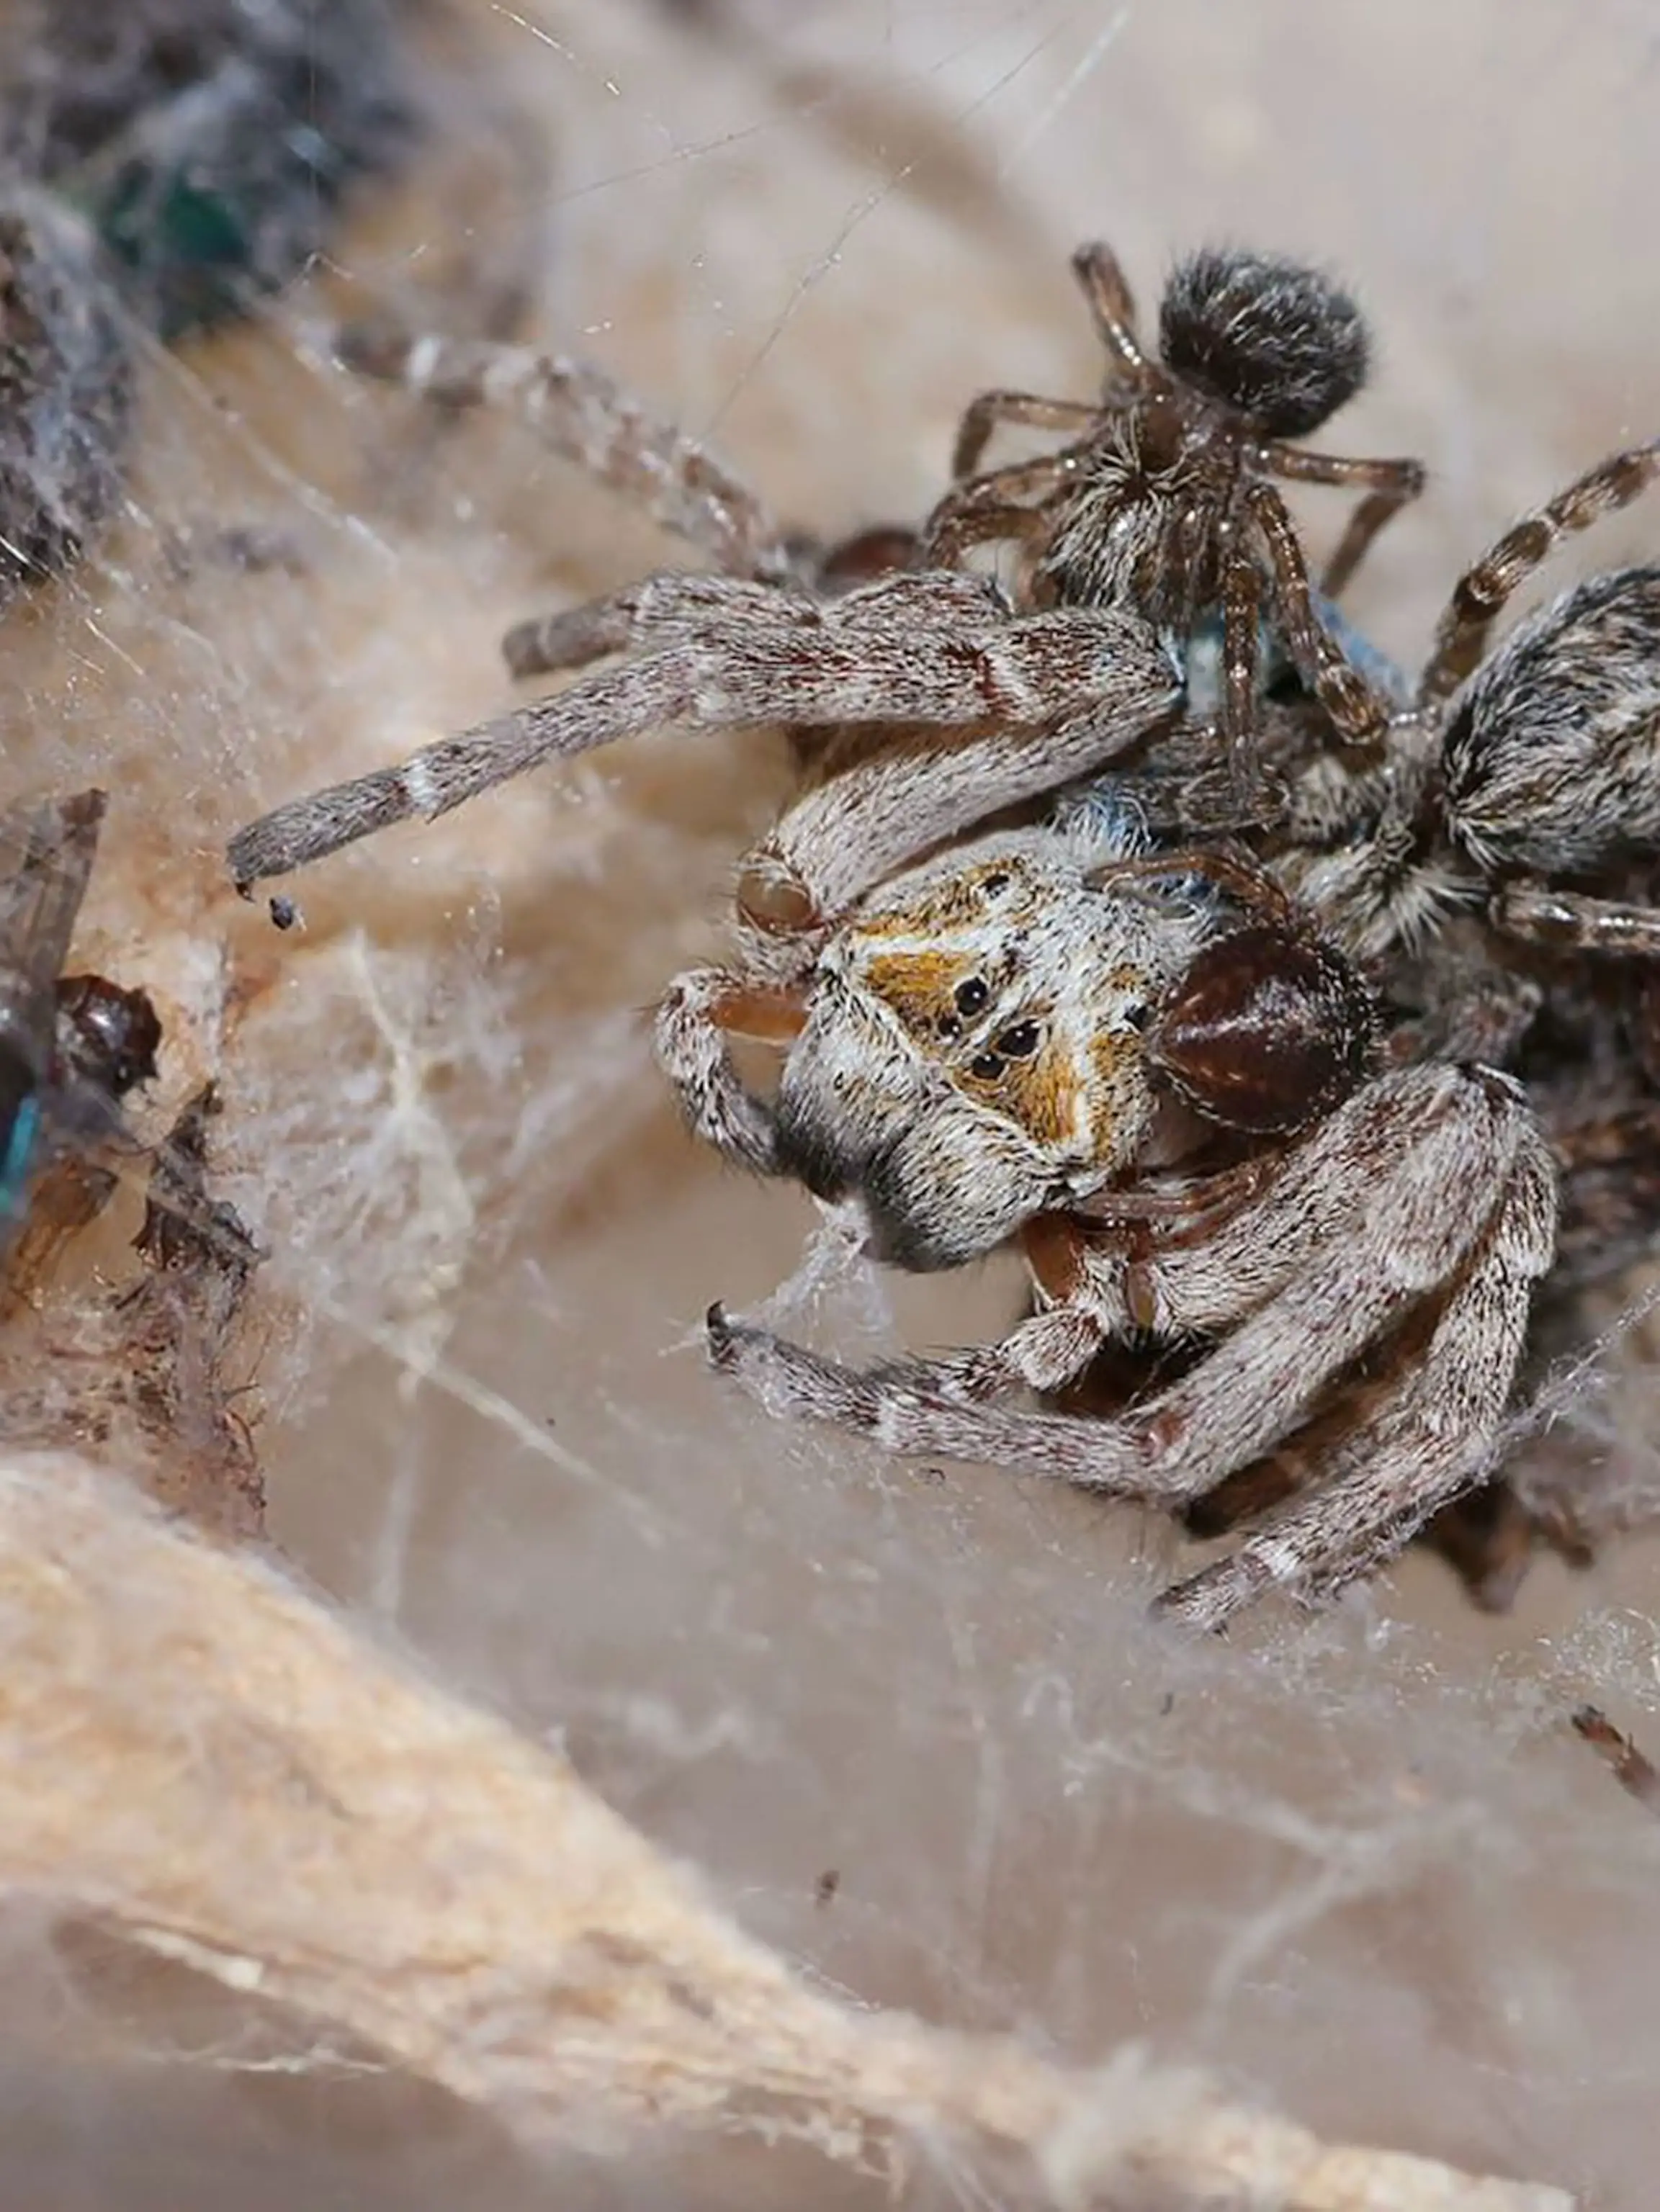 Comparison Of The Behavior Of Spiders That Carry Their Babies On Their Back